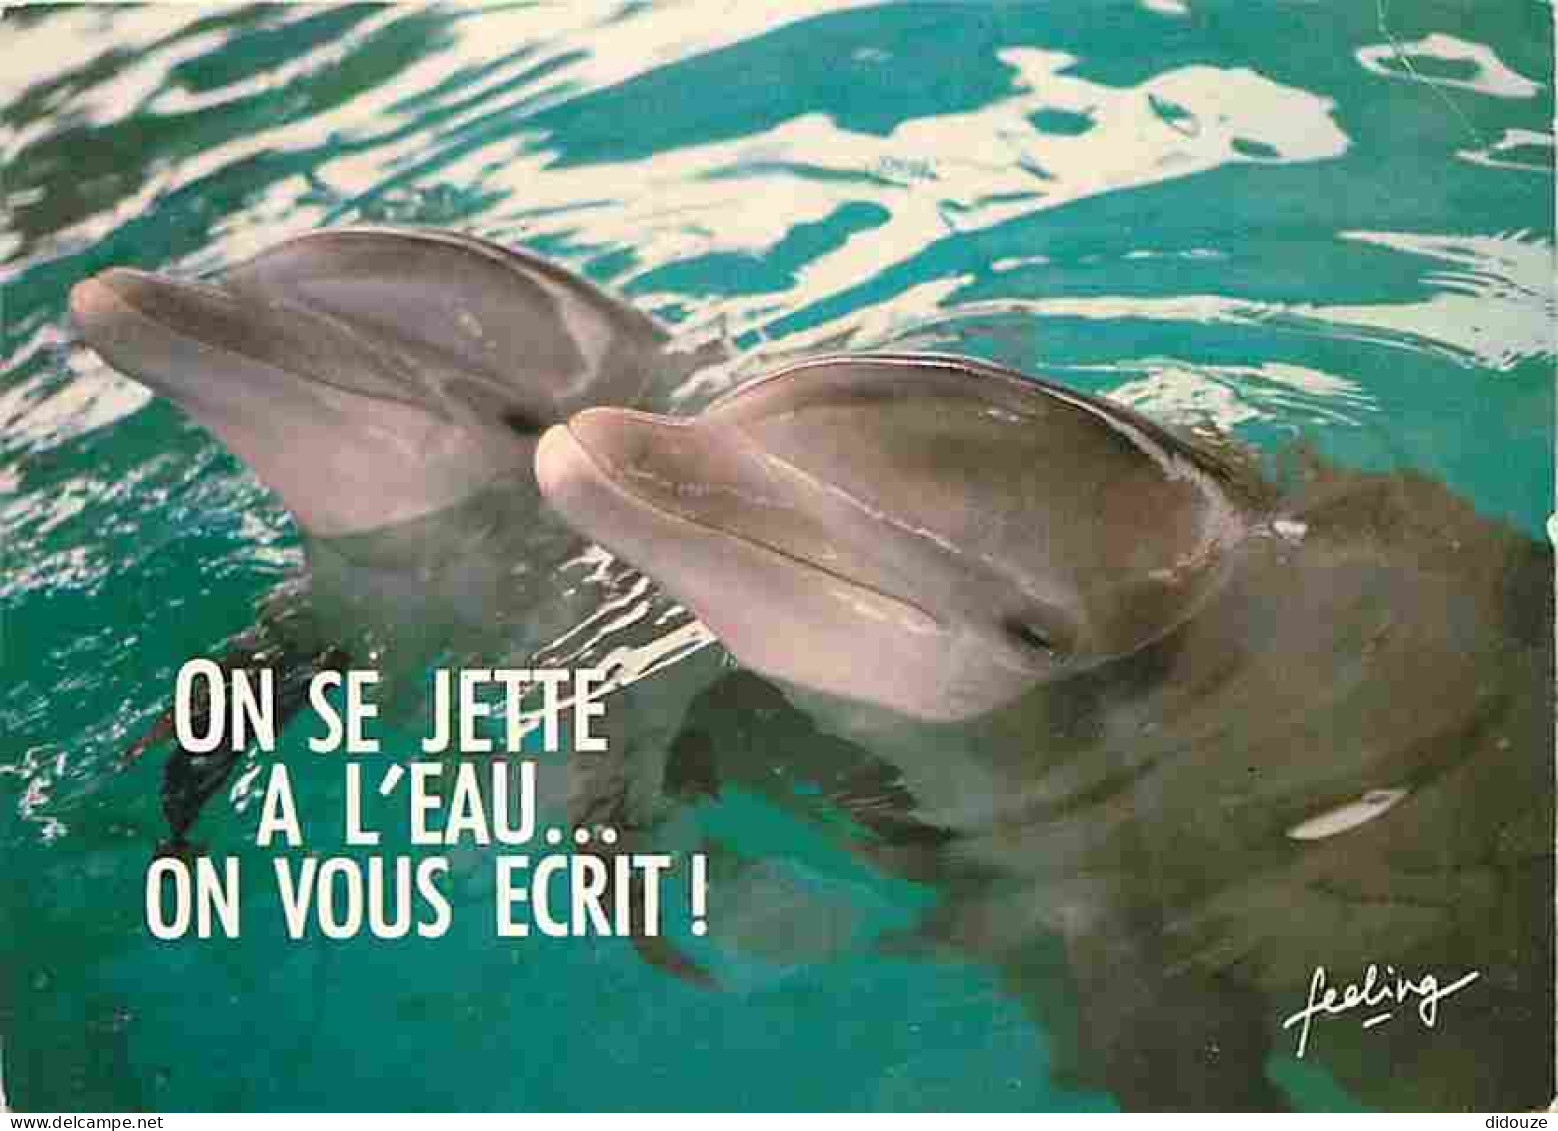 Animaux - Dauphins - CPM - Voir Scans Recto-Verso - Dauphins